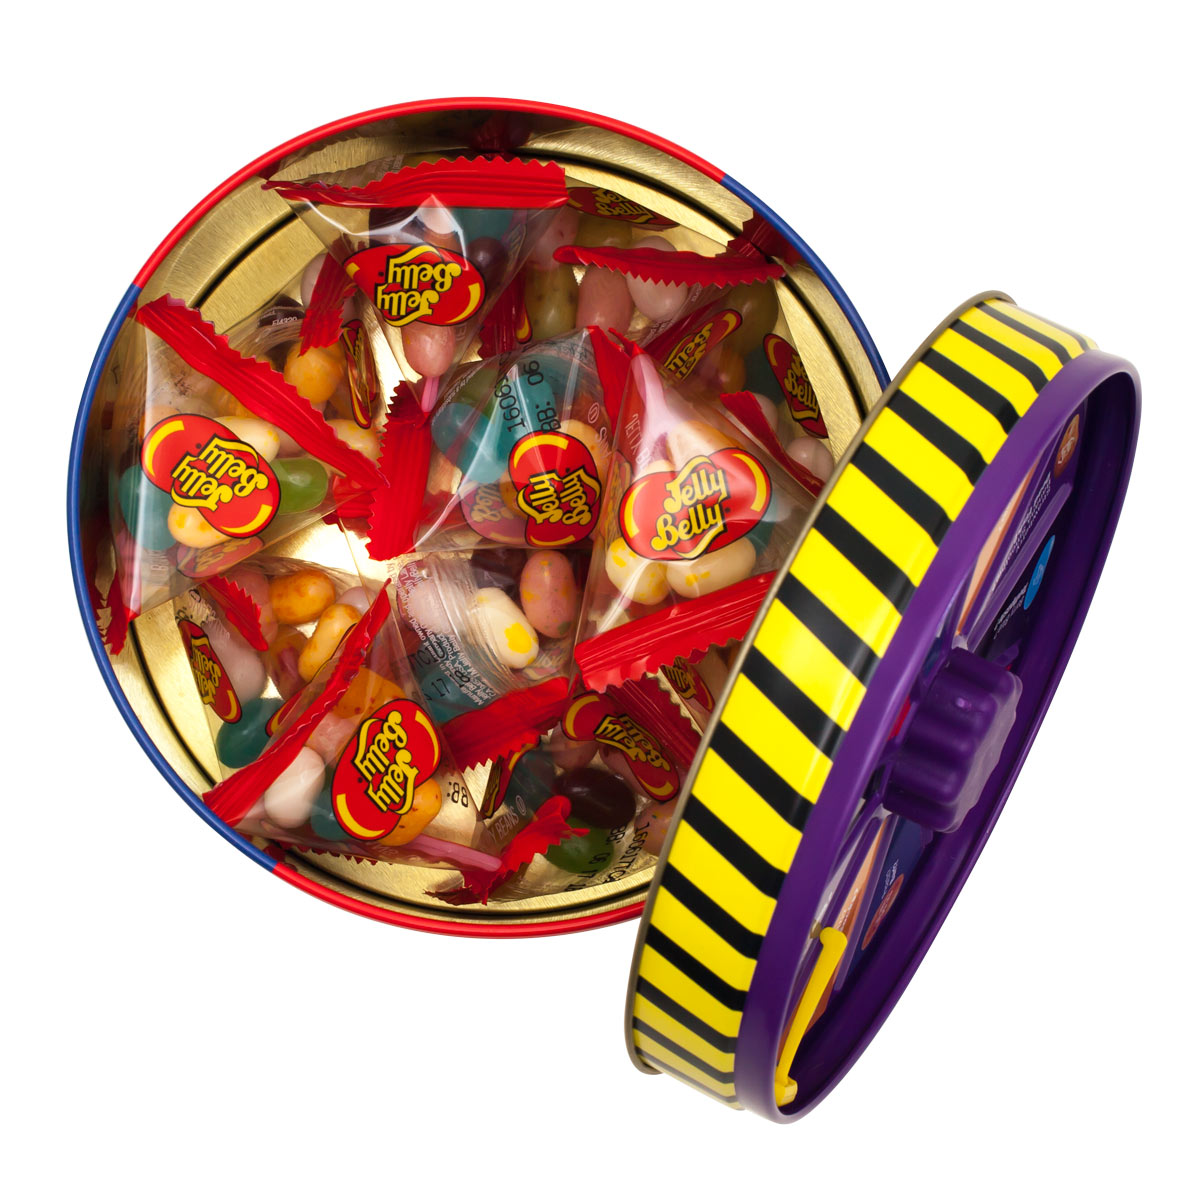     Bean Boozled: 20  , 95  (Jelly Belly 62283)